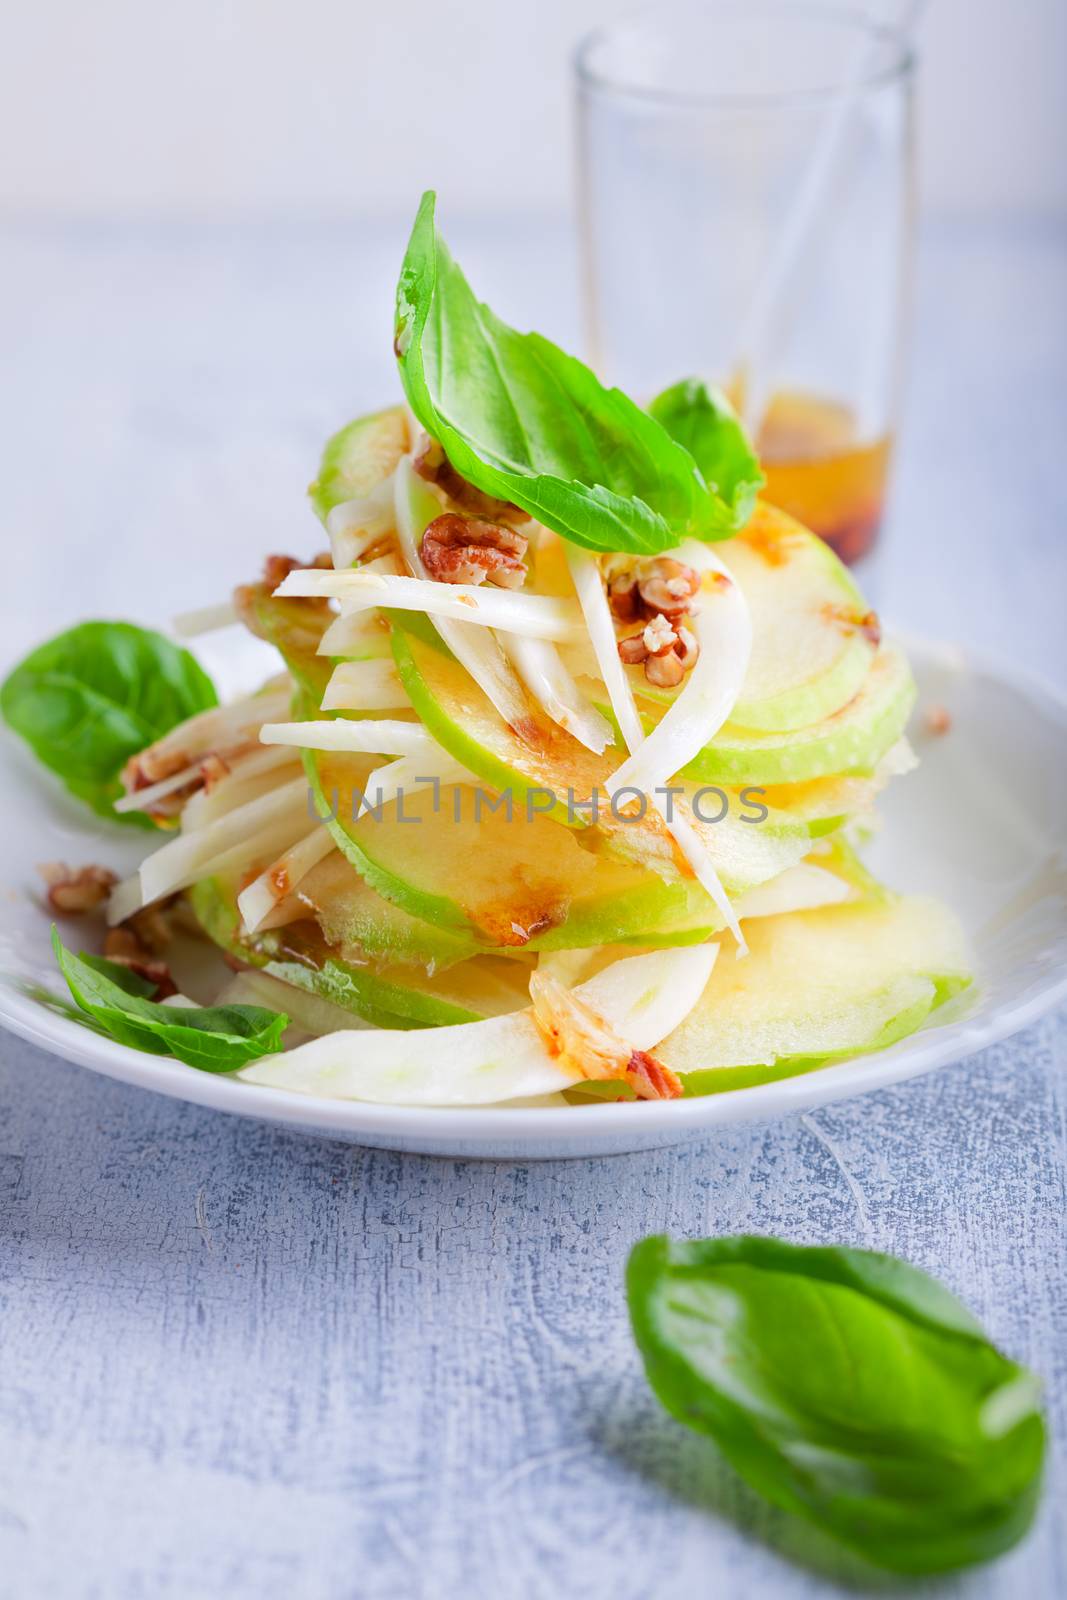 Fennel and apple salad  by supercat67